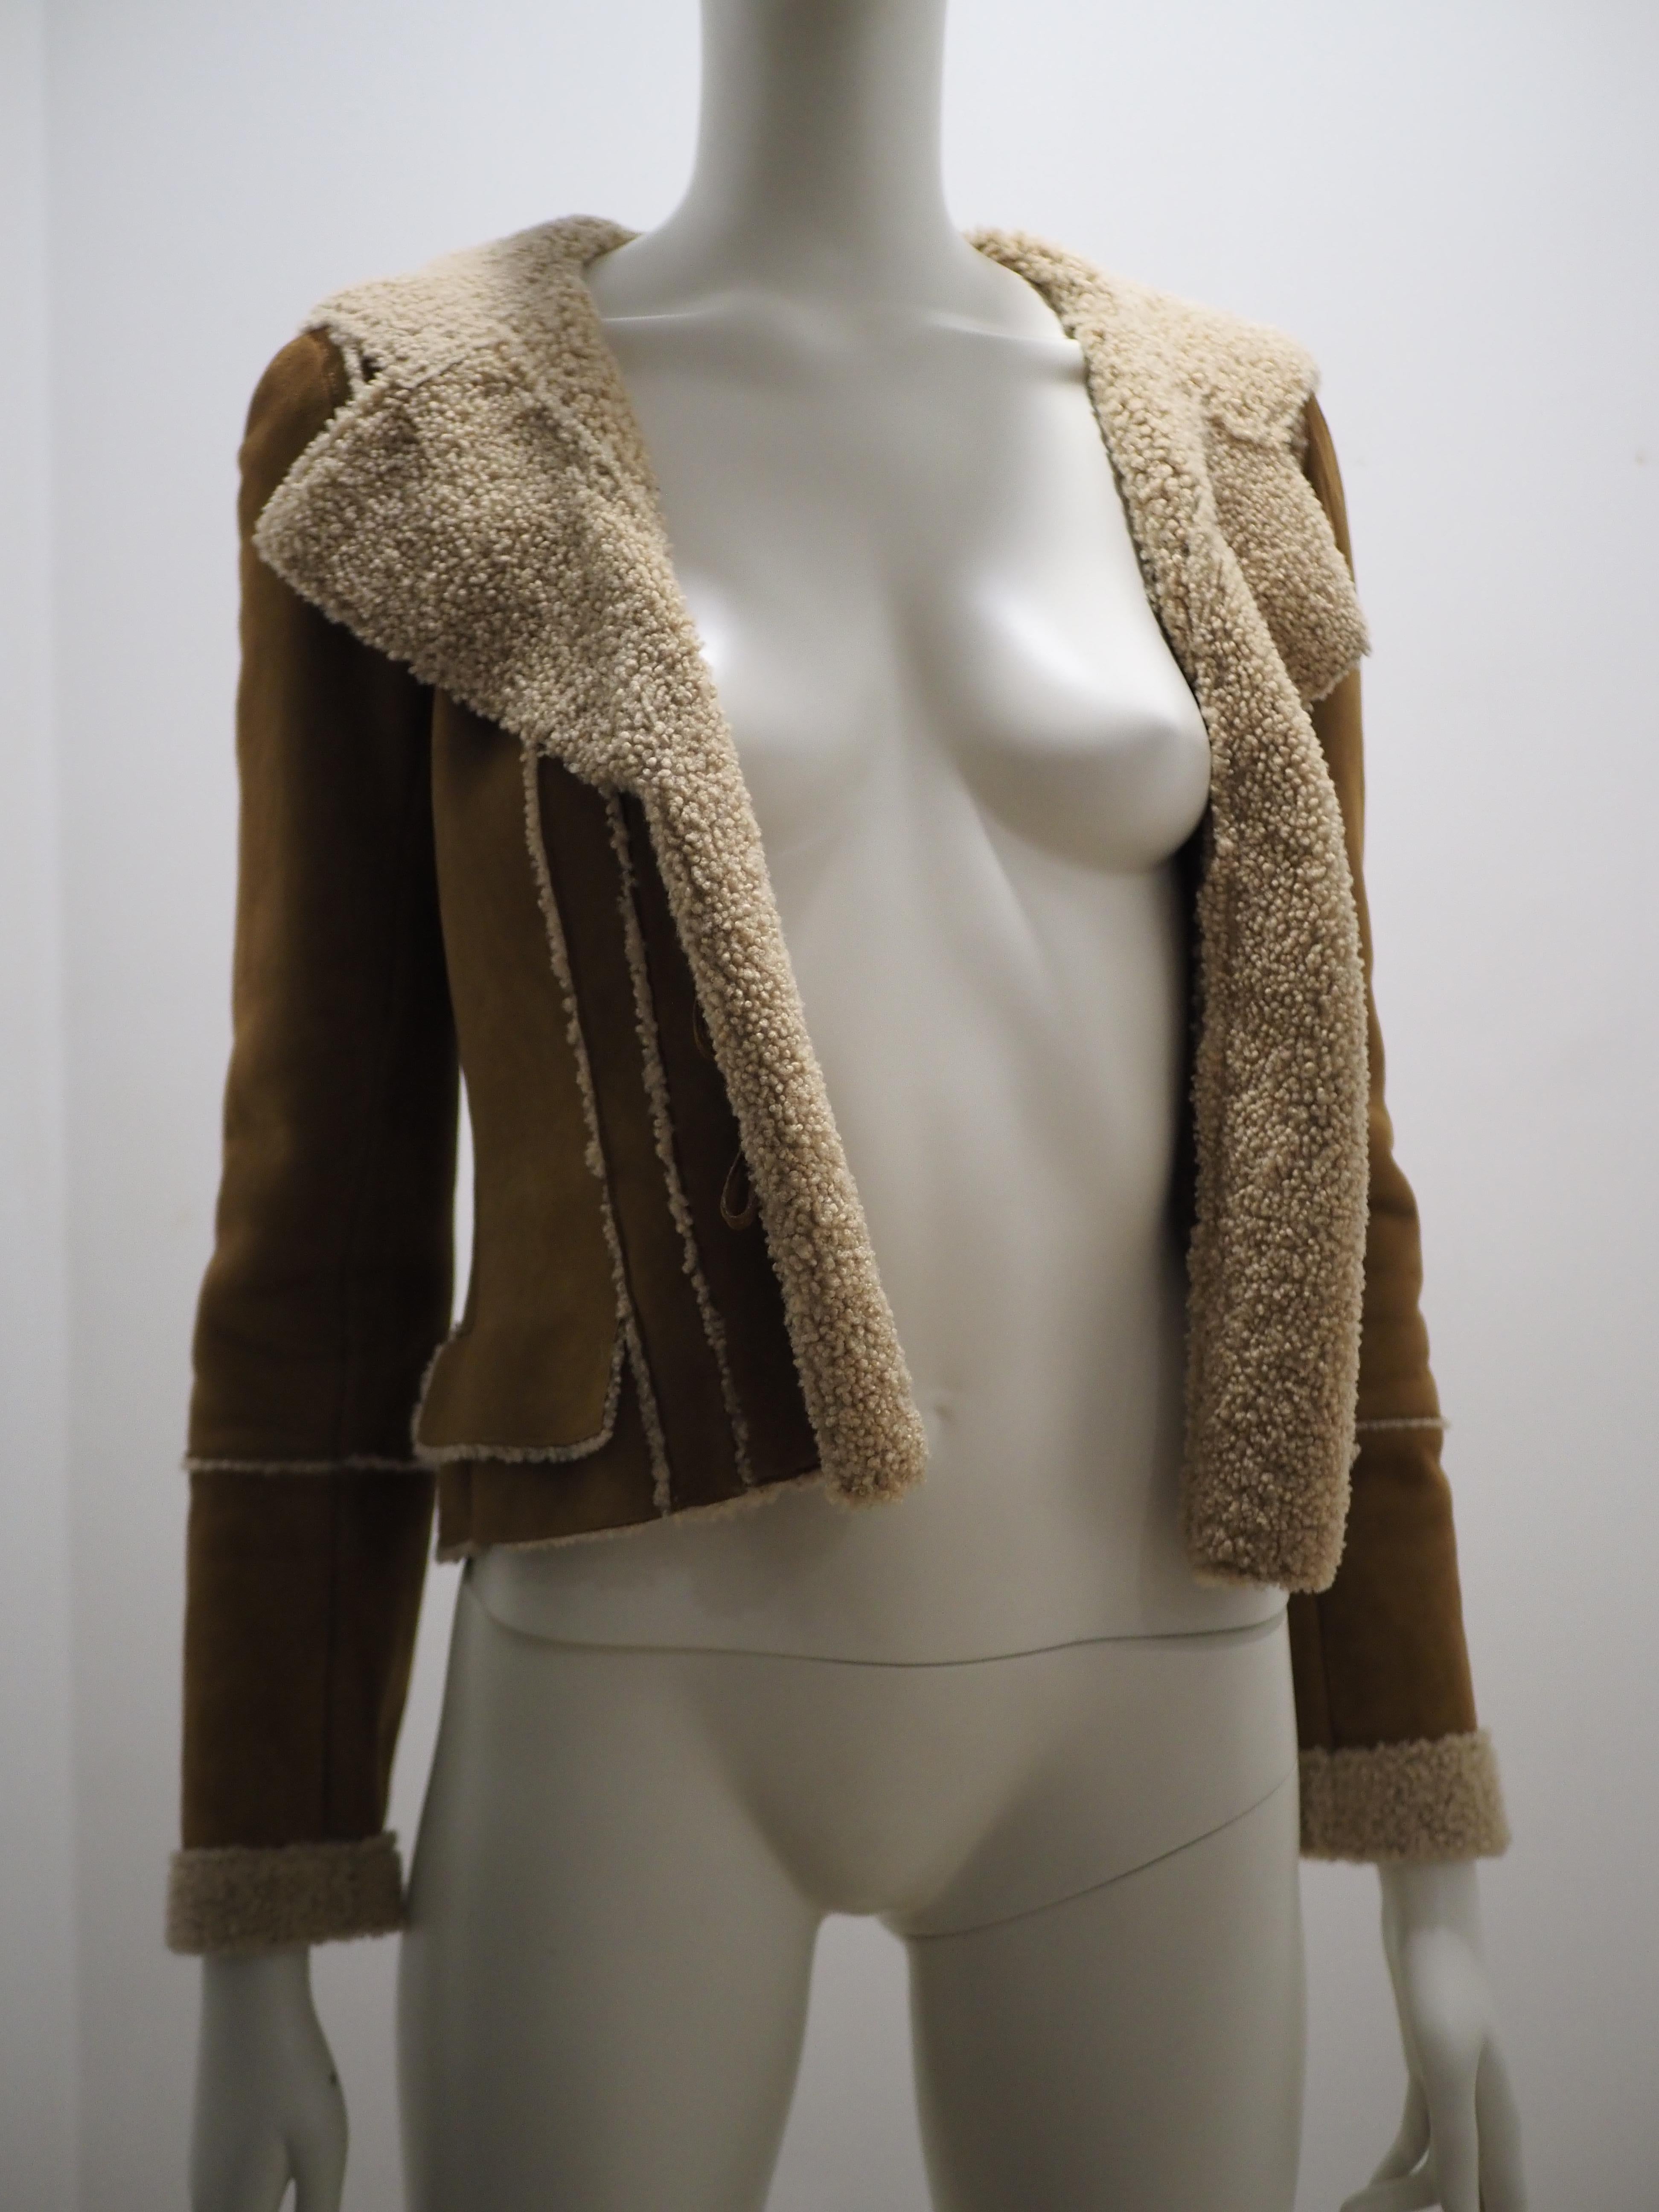 Chanel sheepskin jacket
totally made in France in Size FR 38